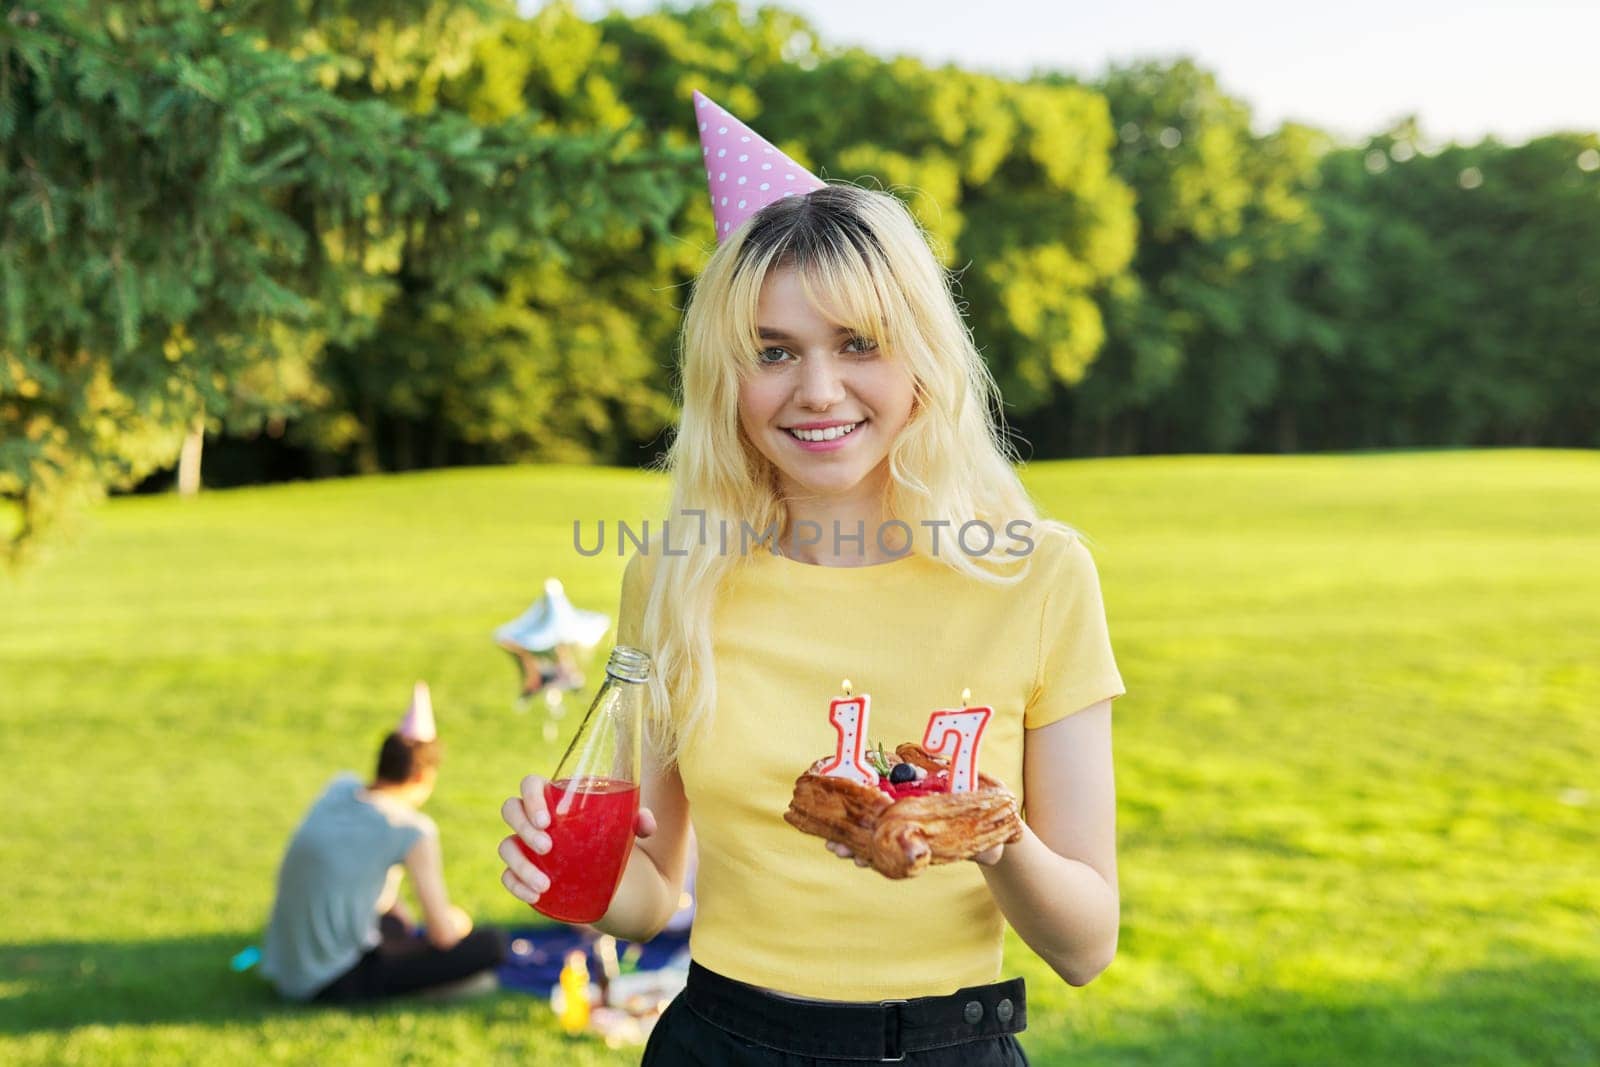 Beautiful teenage girl in festiv hat on birthday with cake and candles. Happy blonde female at outdoor picnic party holding cake with candles 17. Adolescence youth age beauty, holiday birthday concept